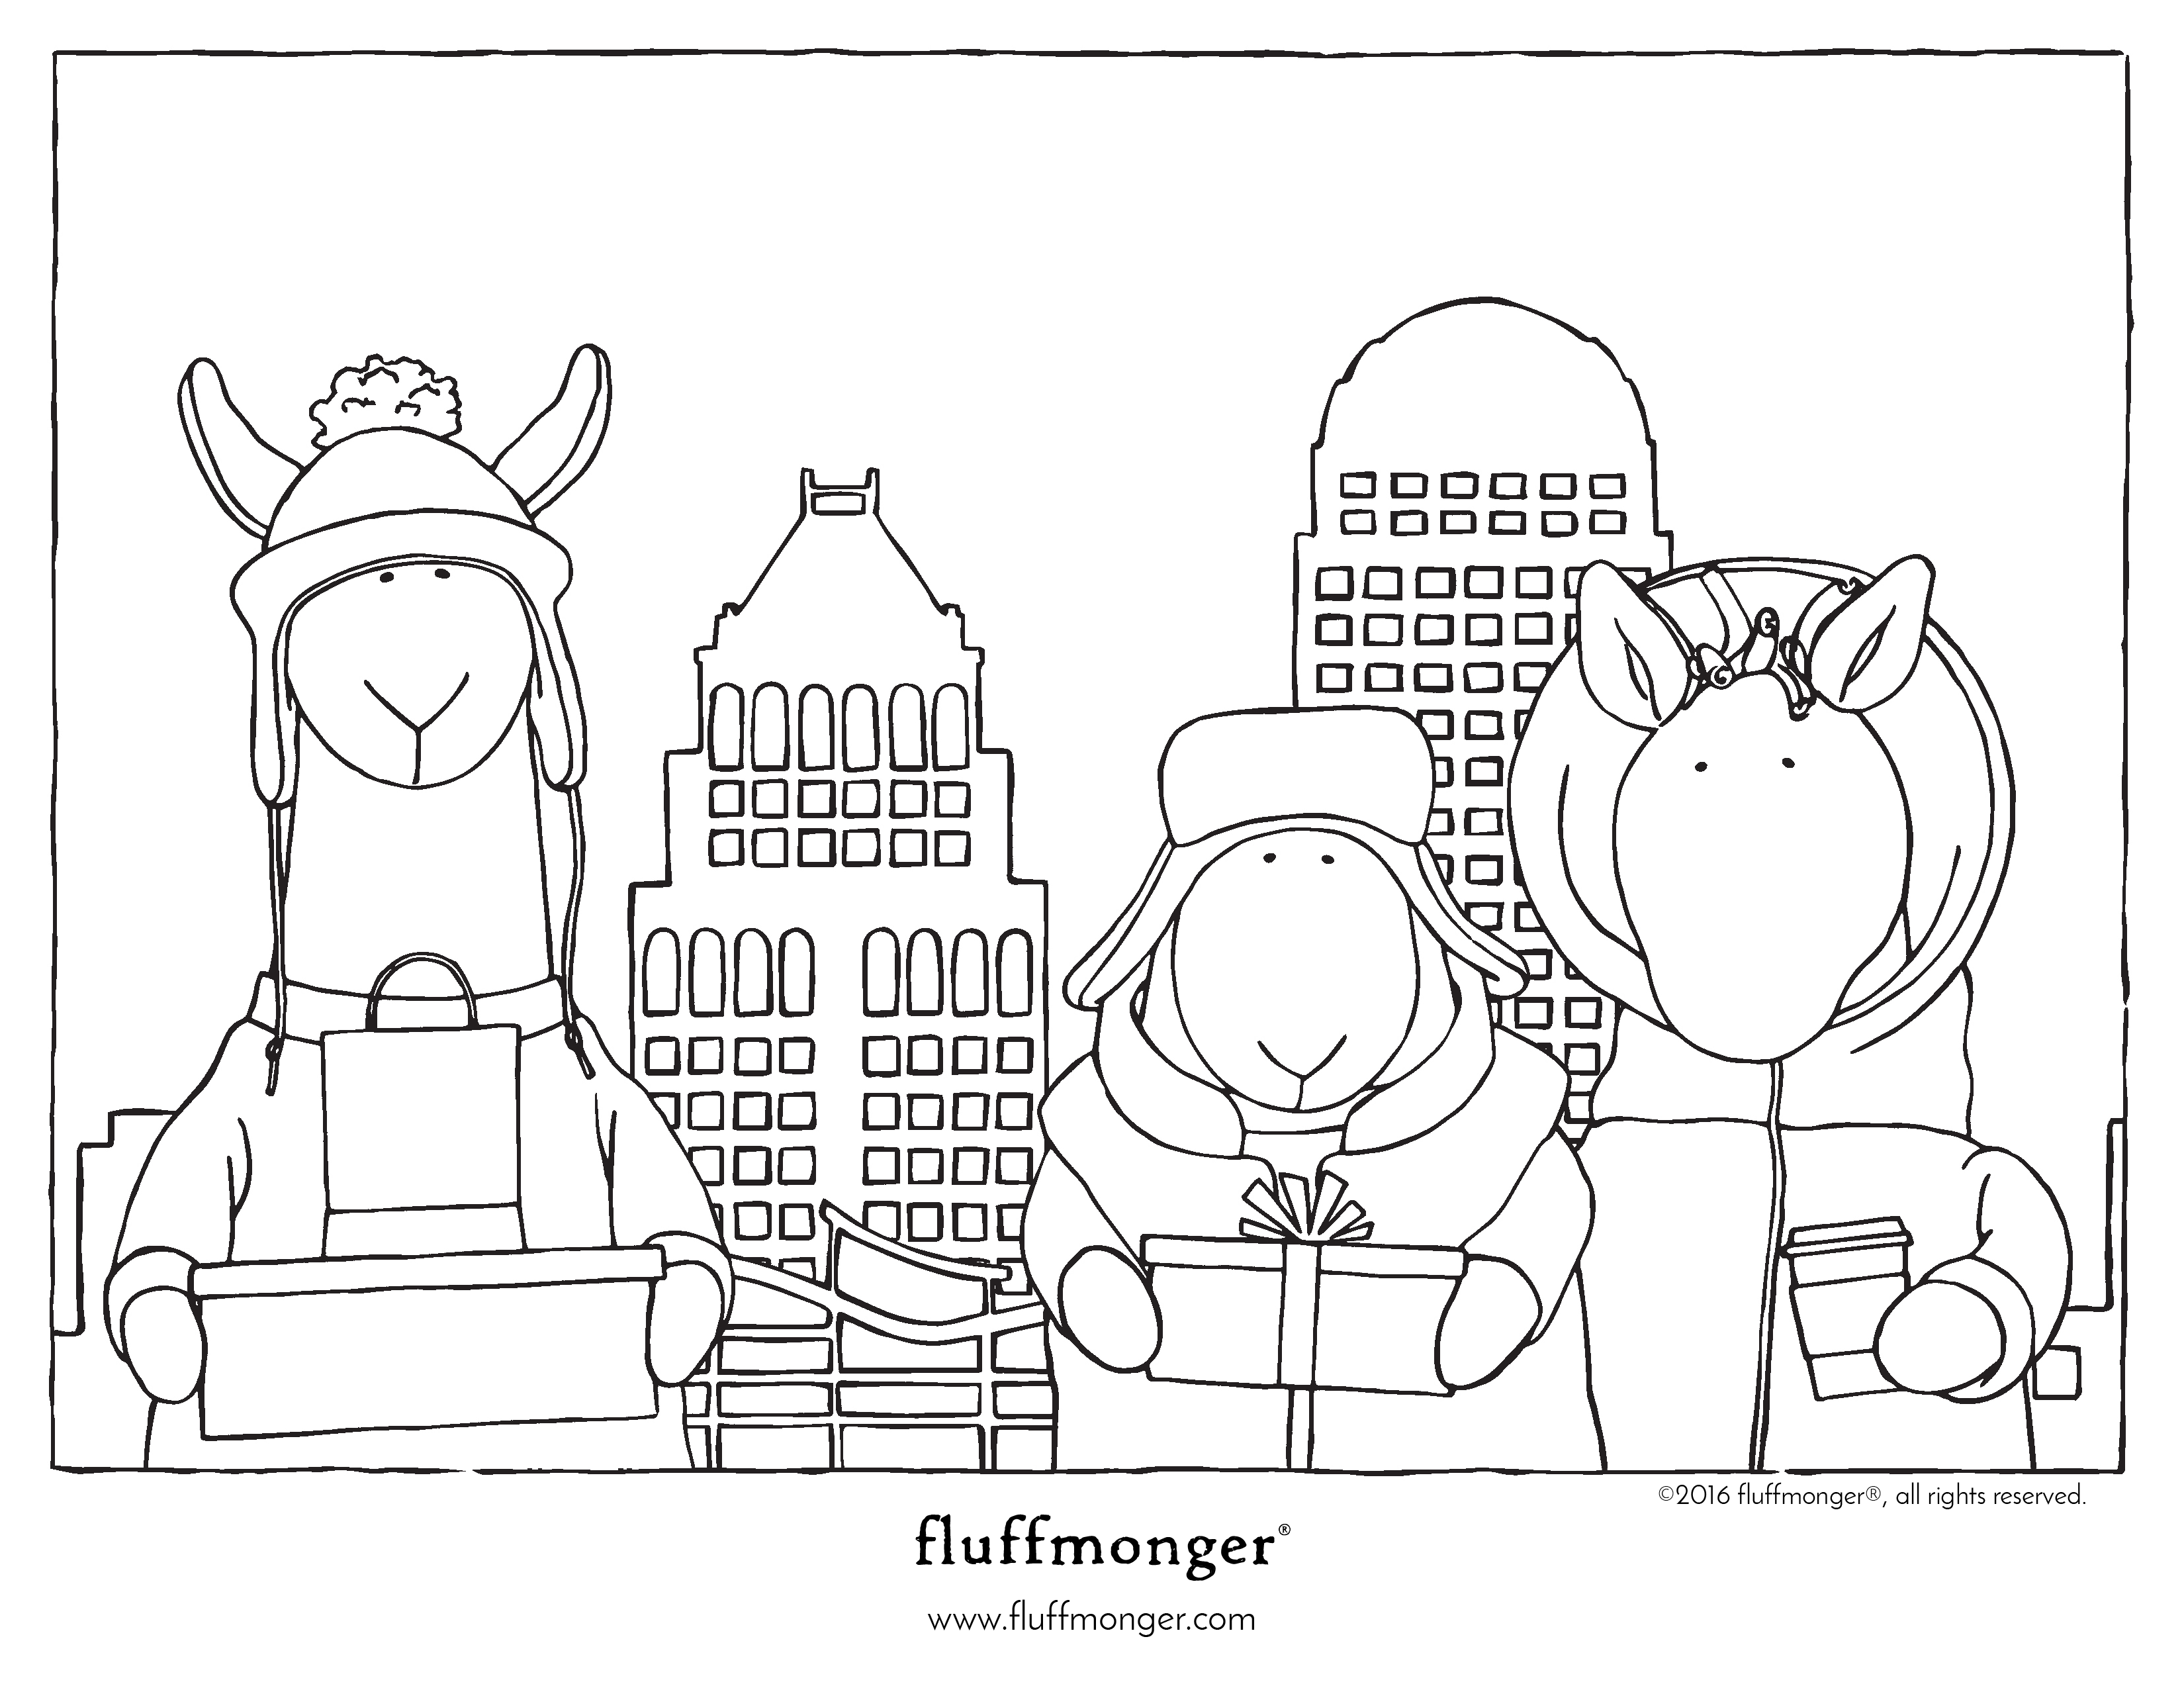 fluffmonger-city-winter-coloring-page-2016-01